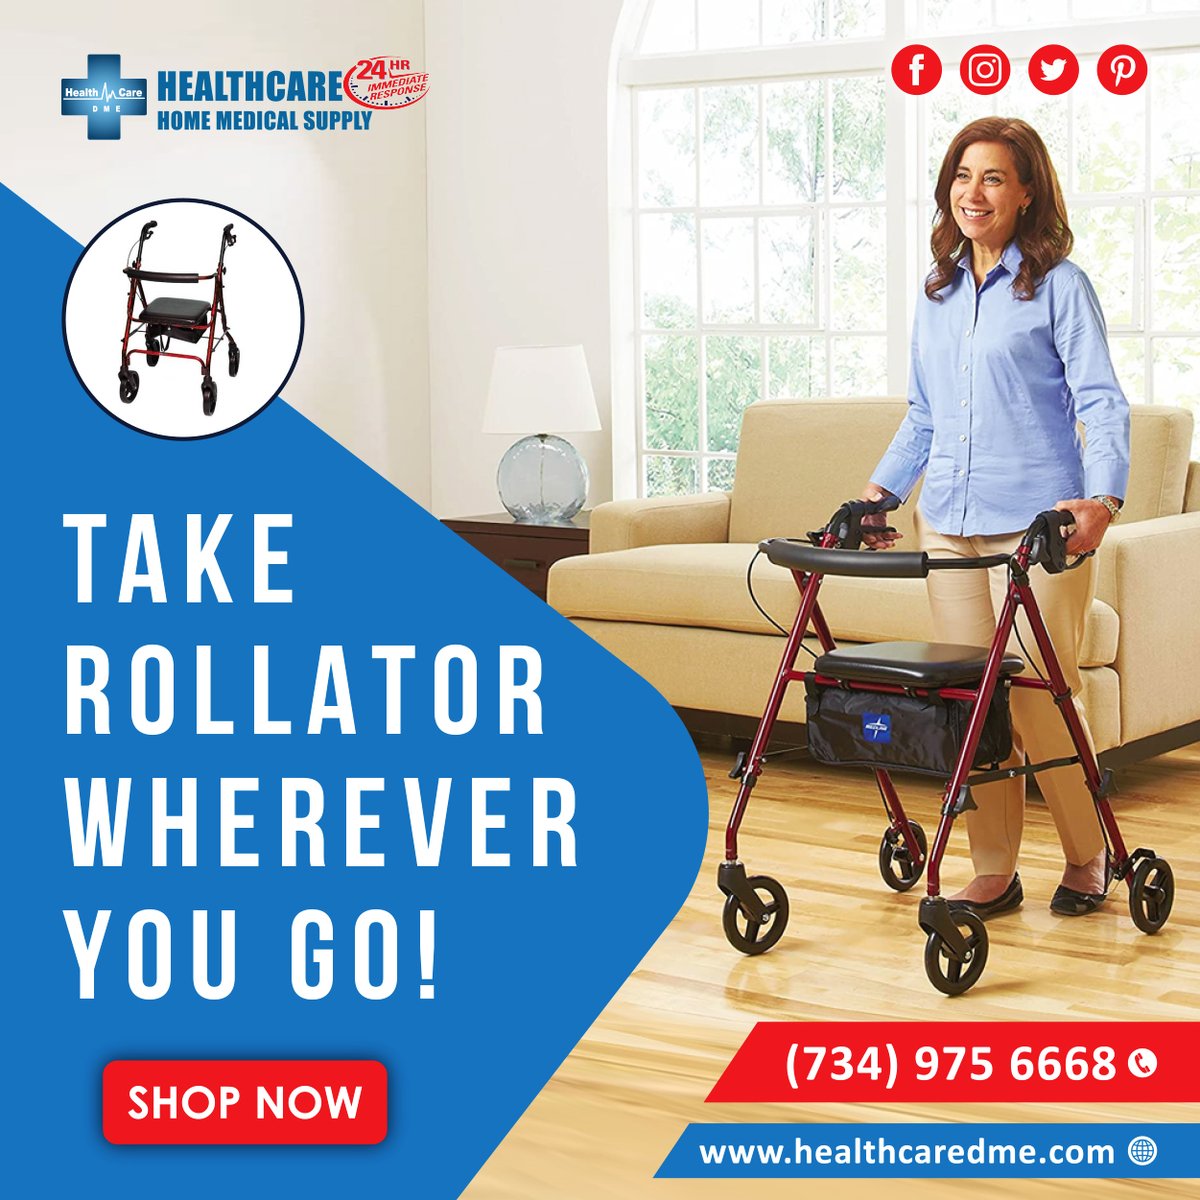 ✔️ Insurance Covered 🦽 Durable Medical Equipment (DME).
🔥 Healthcare DME offering Free Shipping on all orders over $100
For more please visit: healthcaredme.com/ambulatory-equ…
#durablemedicalequipment #DME #medical #healthcare #hospitalbeds #canes #crutches #transportchairs #wheelchair